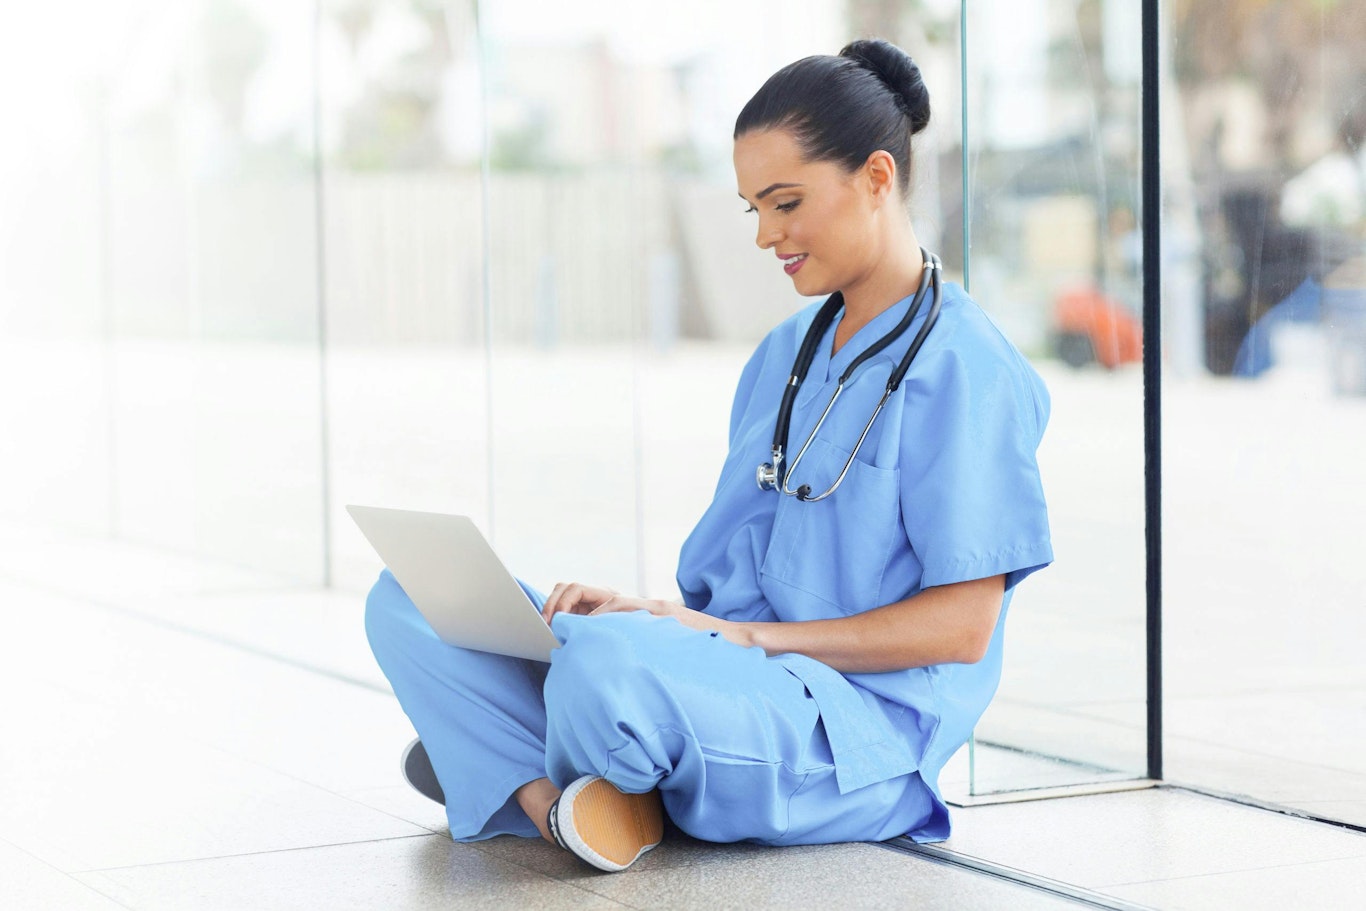 Medical professional sitting with laptop